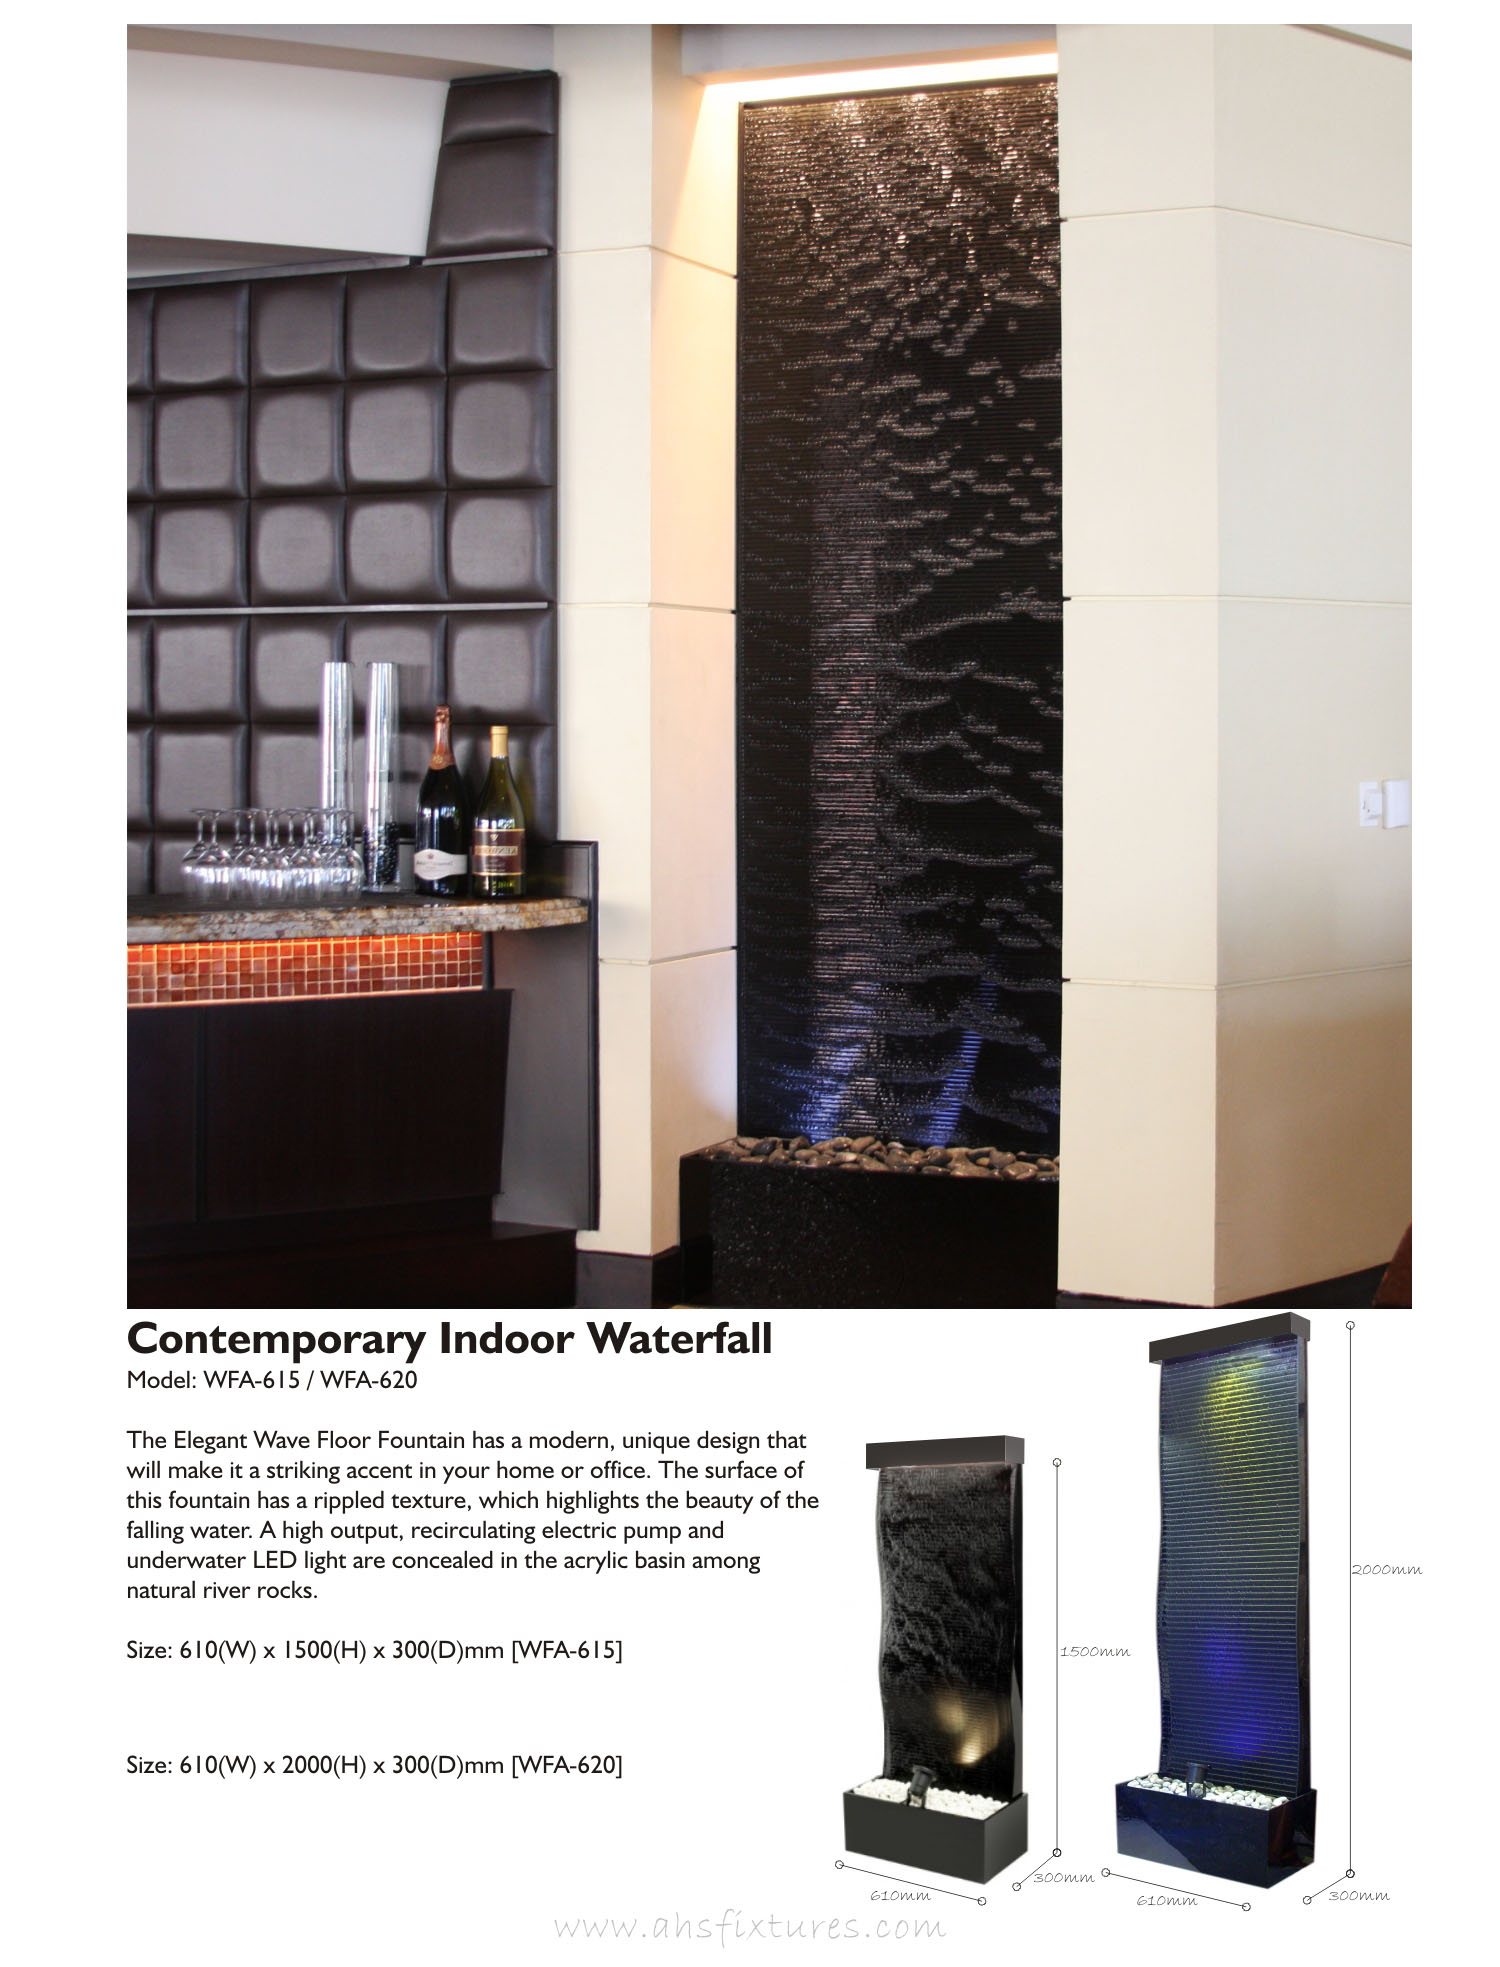 WFA-620 Contemporary Indoor Waterfall Fountains